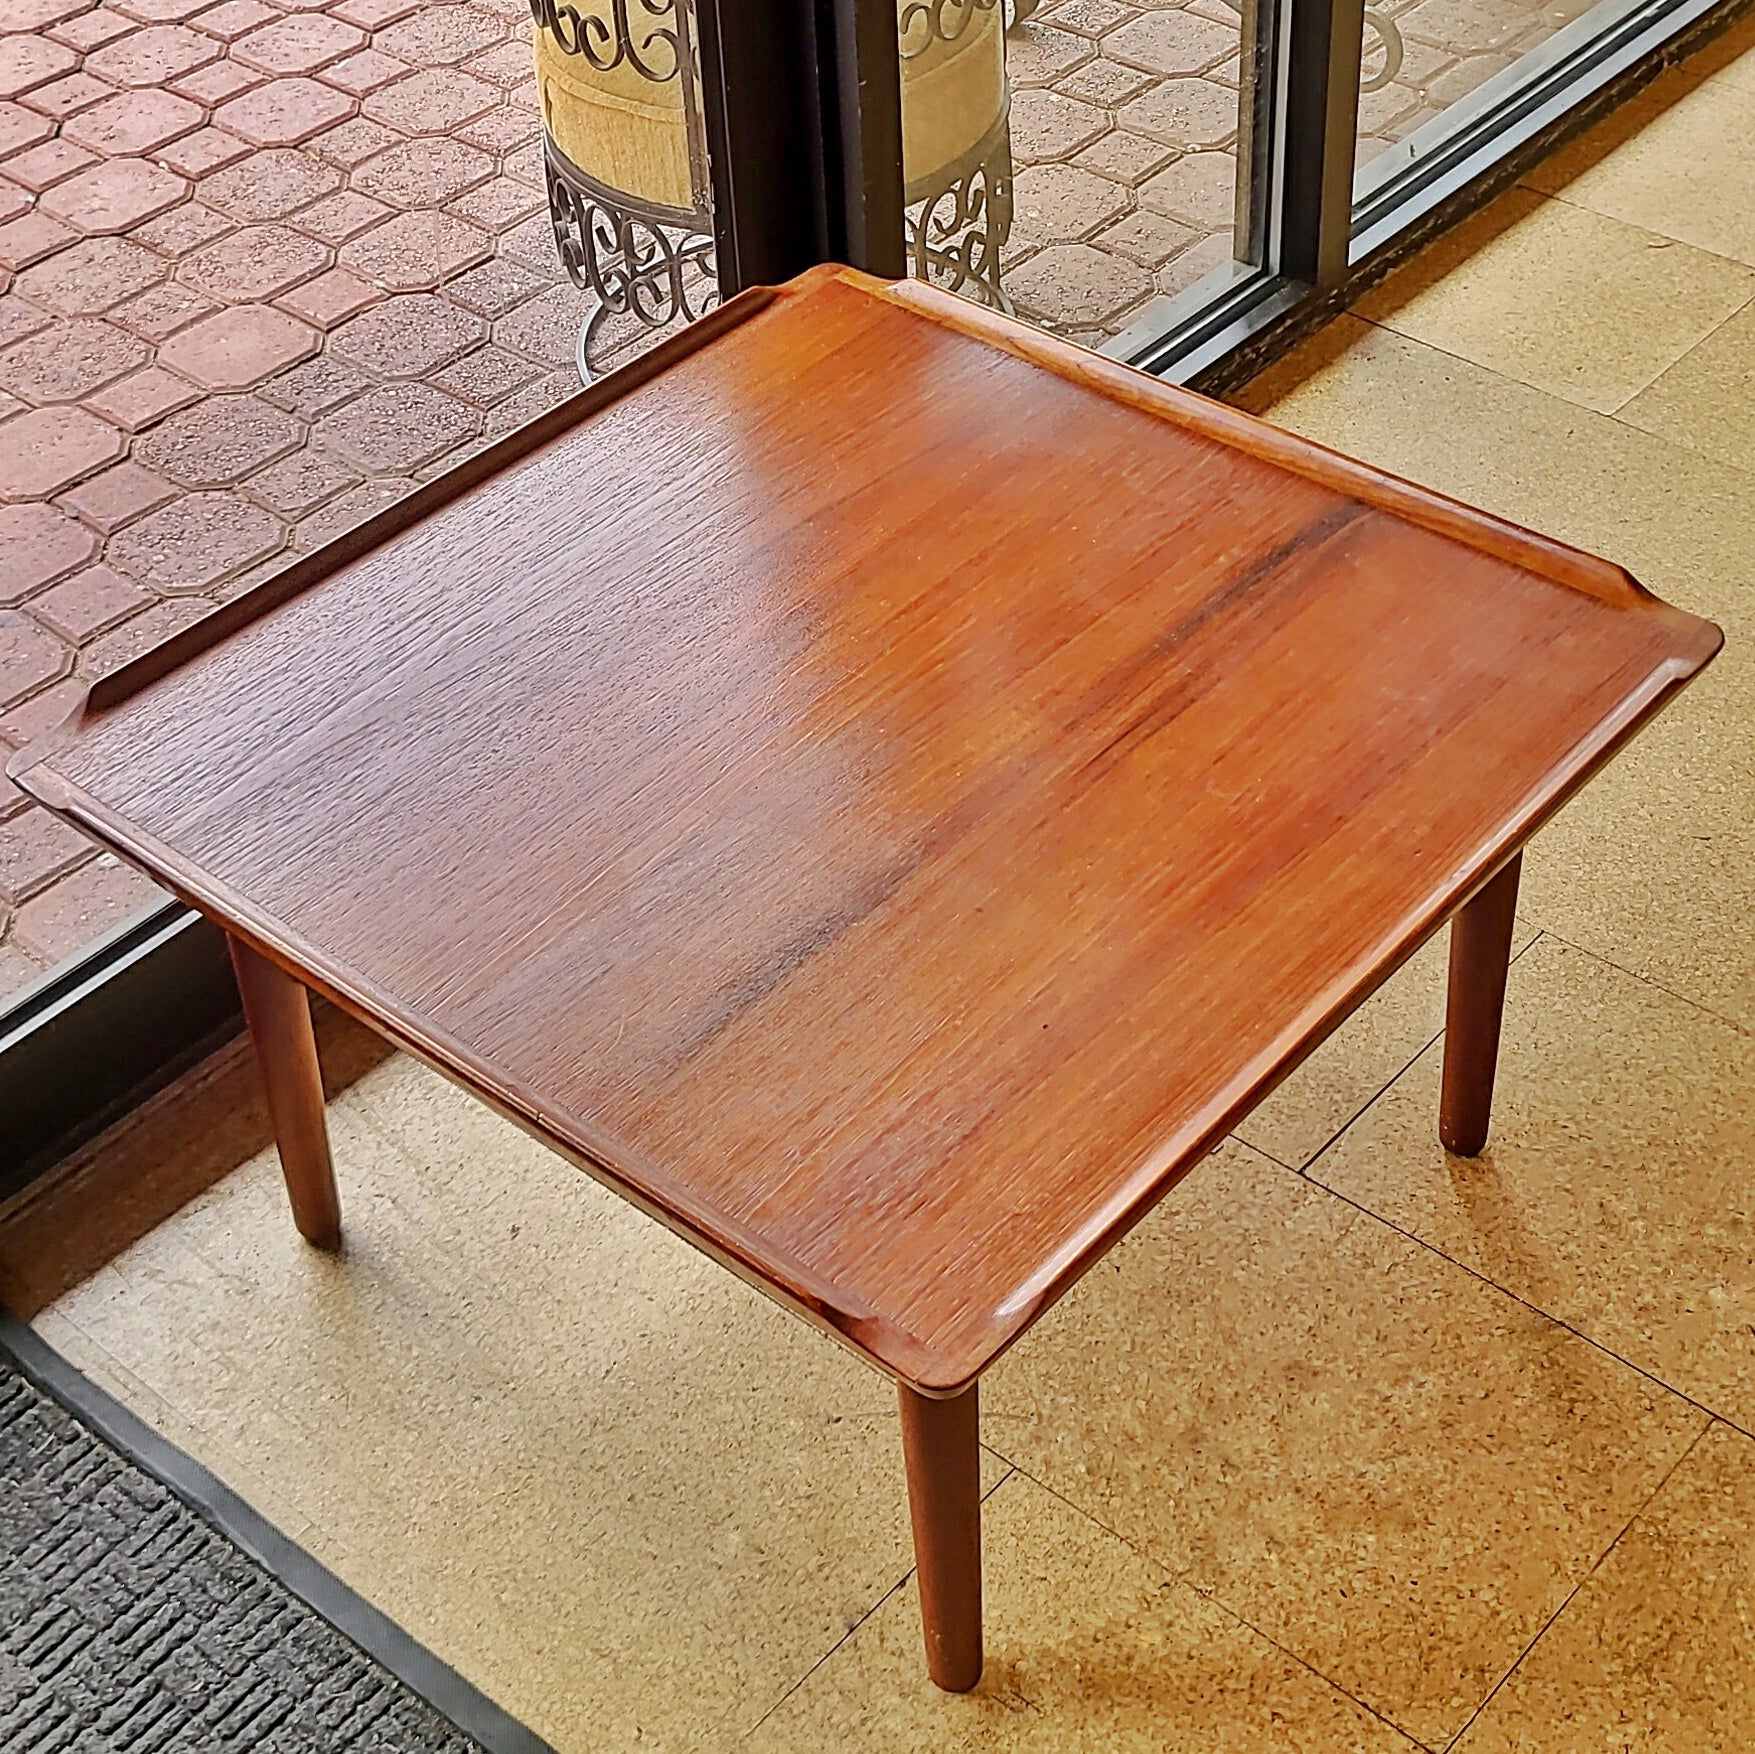 LARGE SQUARE DANISH MODERN TEAK SIDE TABLE WITH HAND-CANED LOWER SHELF